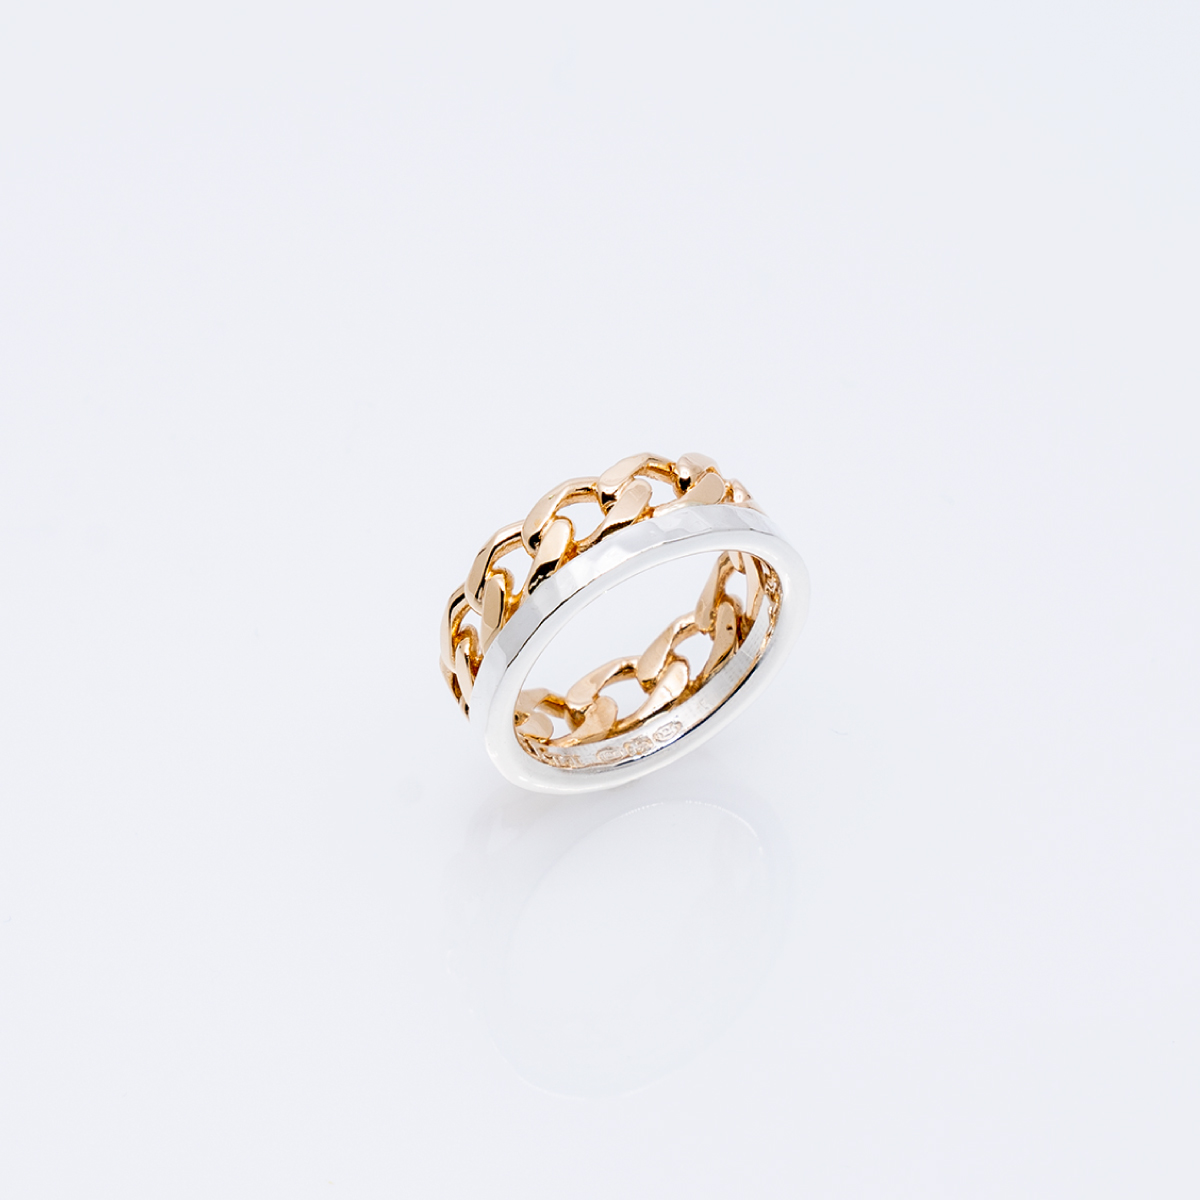 Join Chain Ring / 203Jewelry